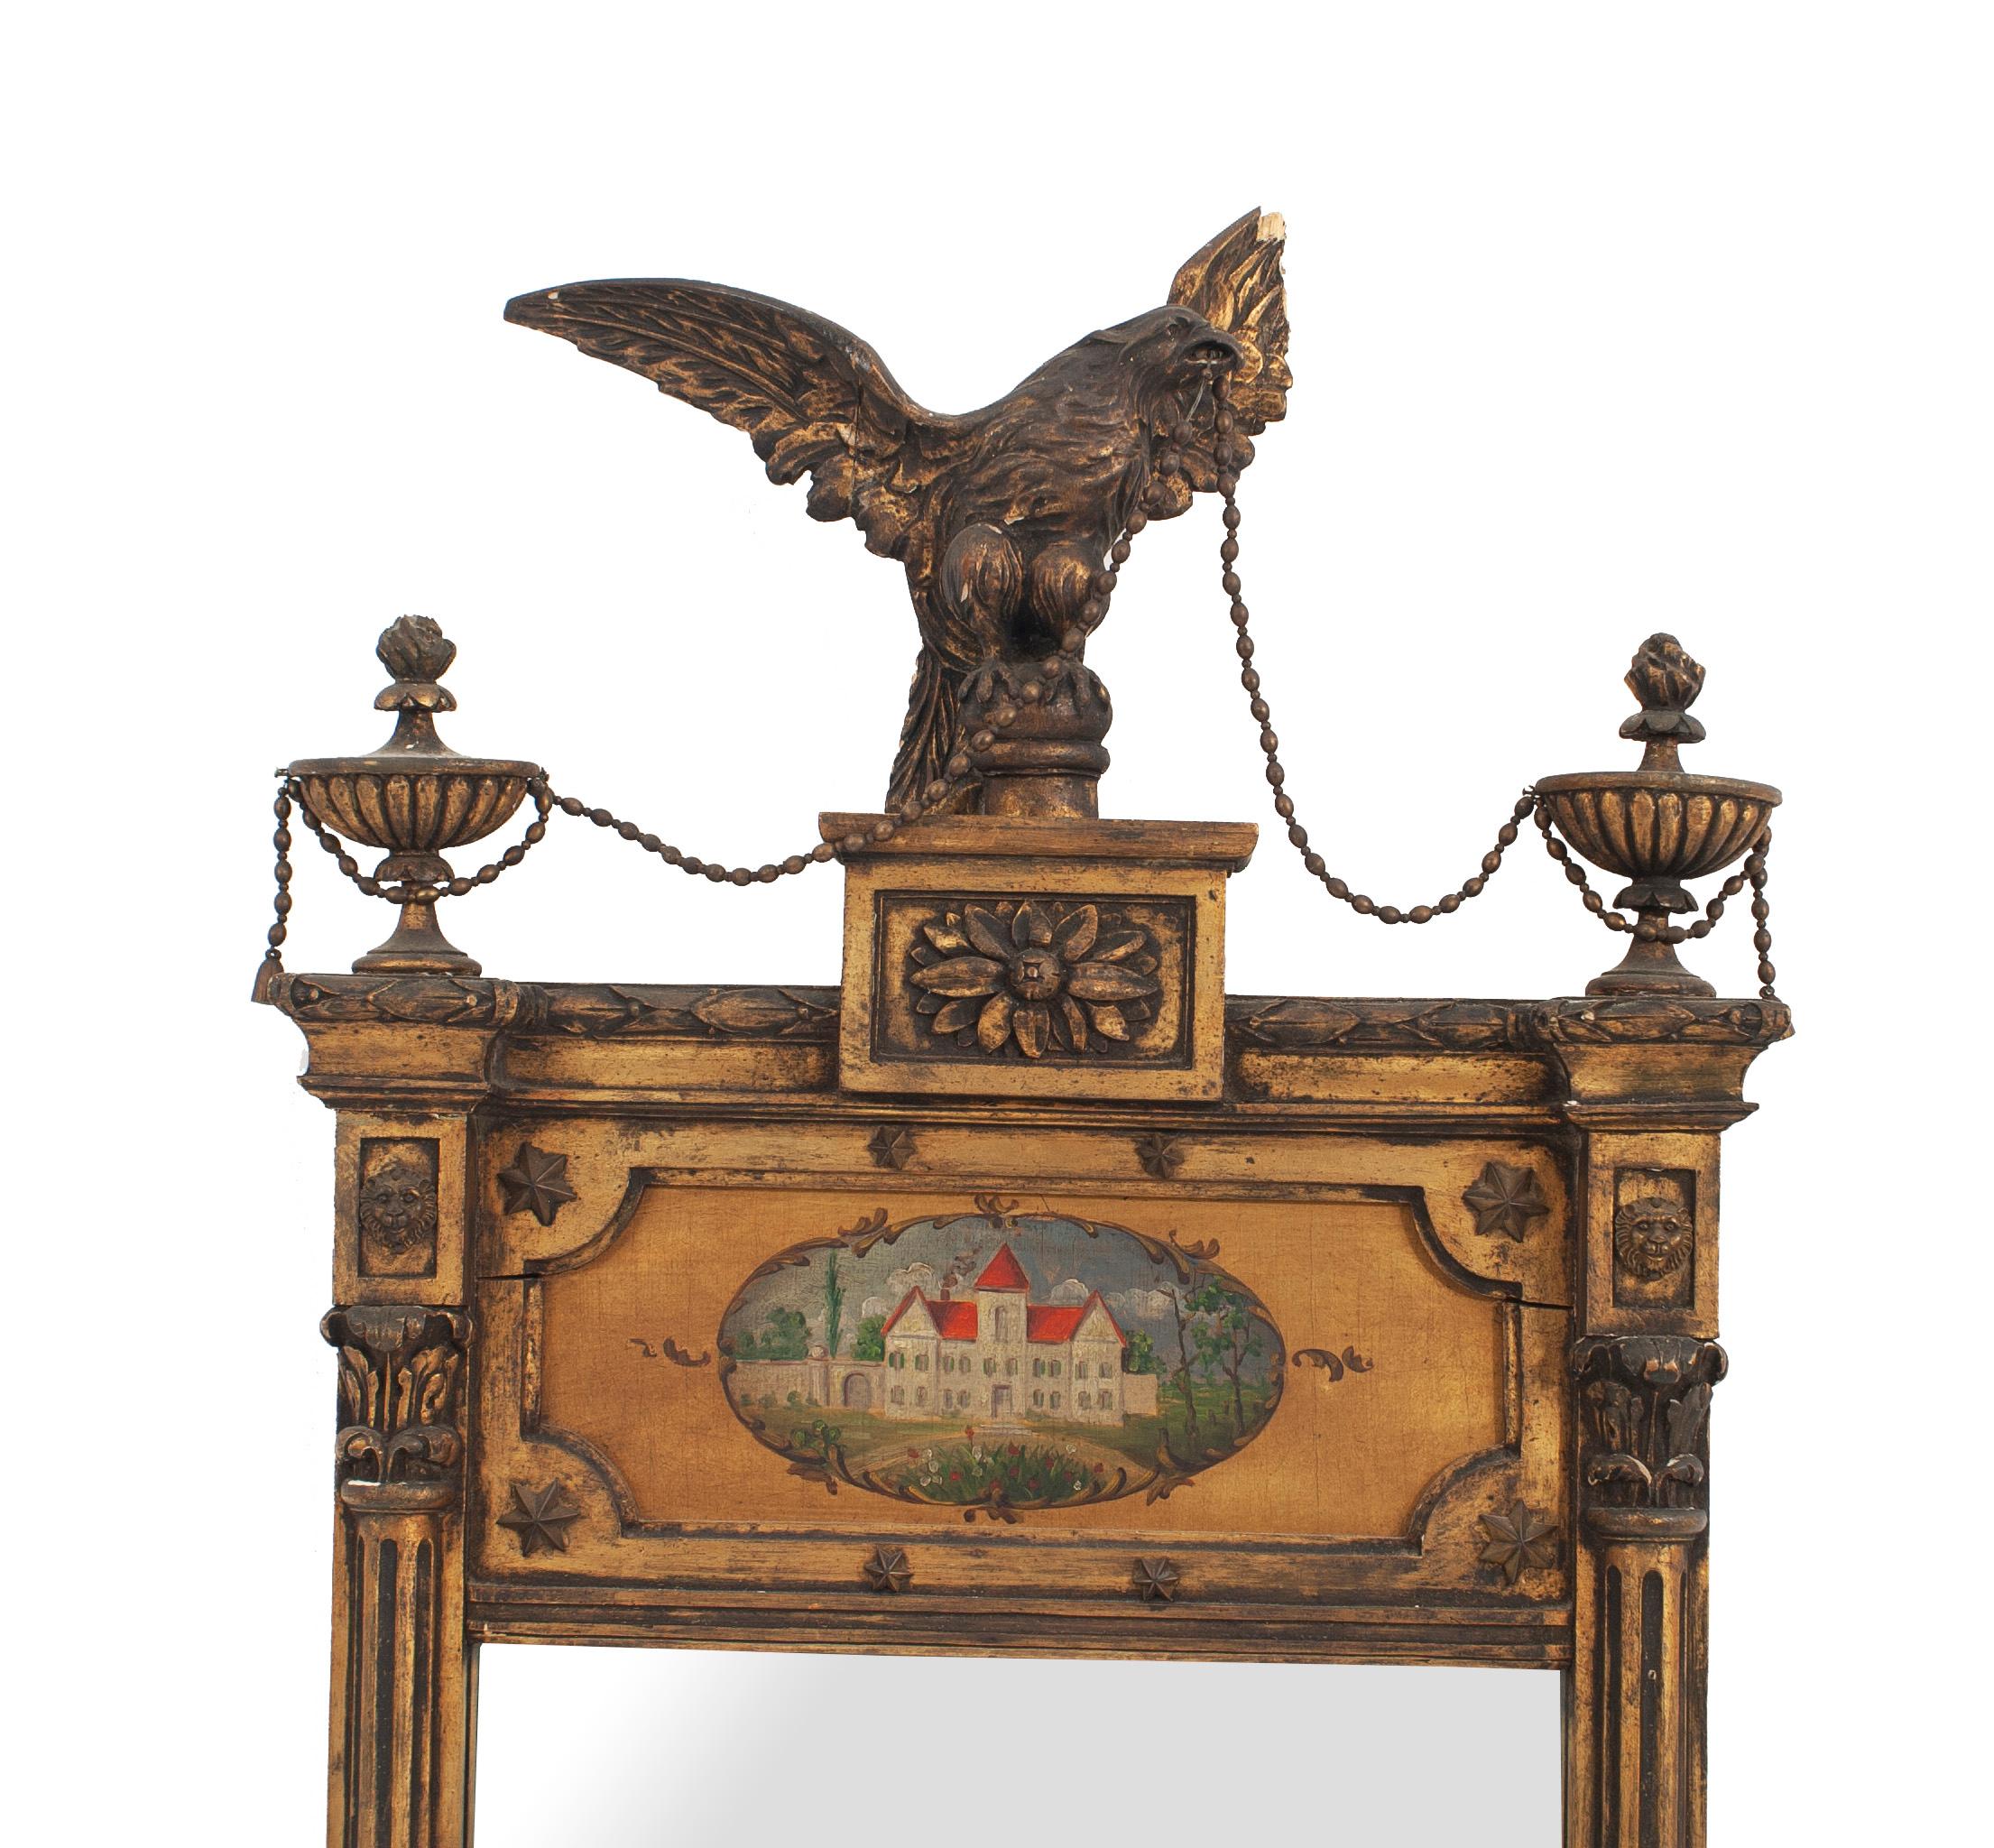 English Adam-style (19th Century) giltwood wall mirror with column sides and a pediment with two urns centering a carved eagle holding a beaded festoon over a large painted house with a red roof.